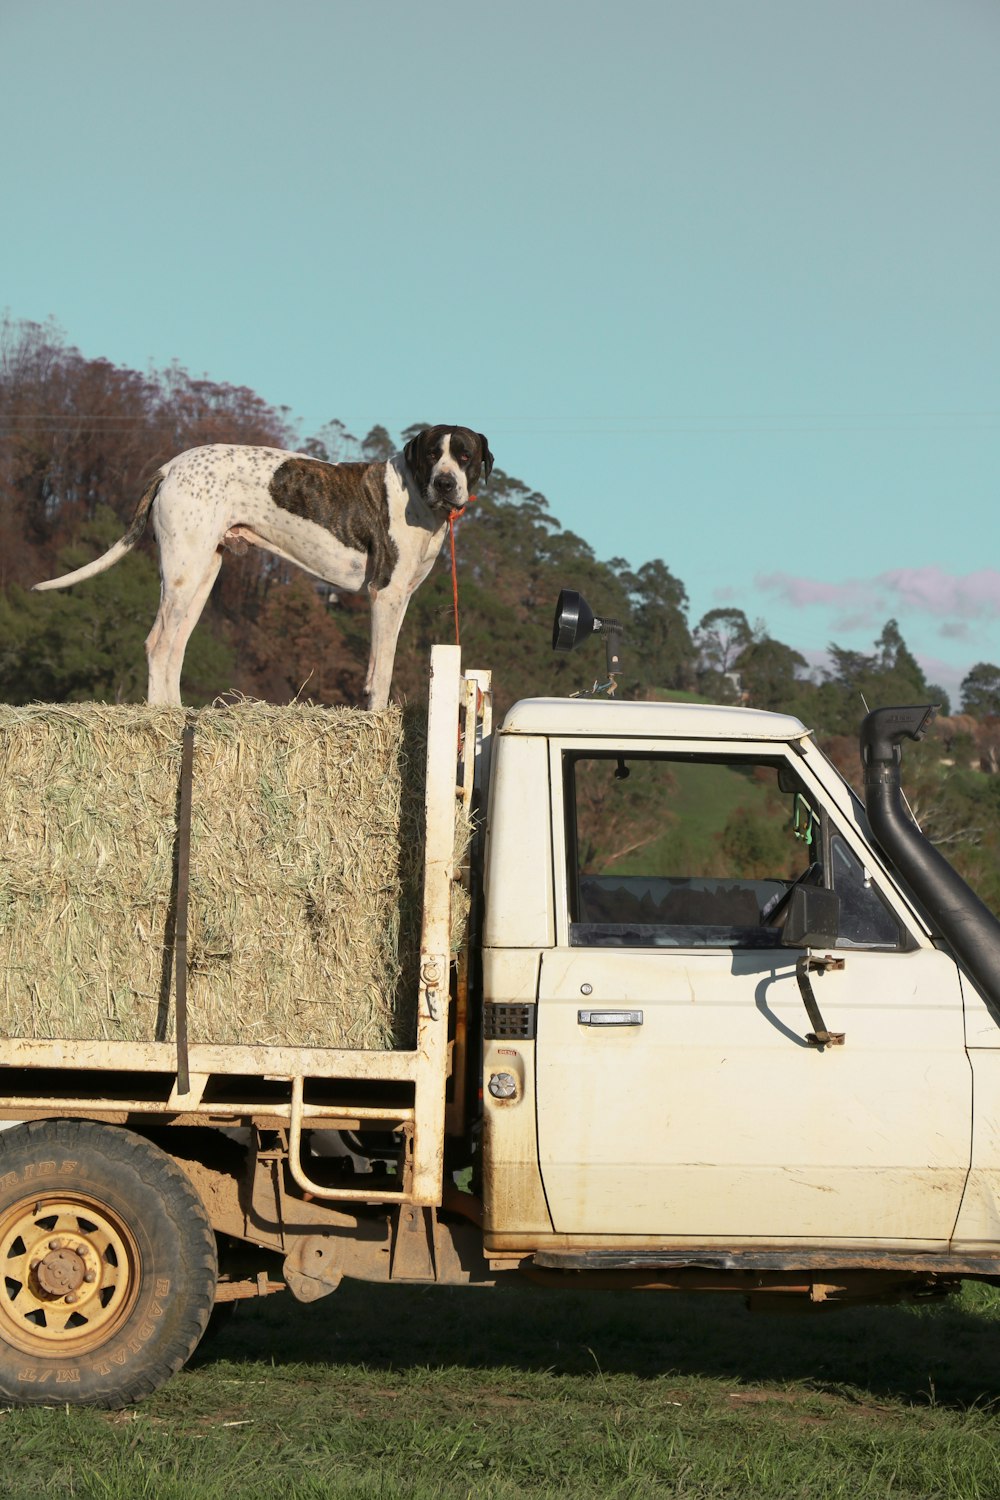 white and black short coated dog on brown truck during daytime